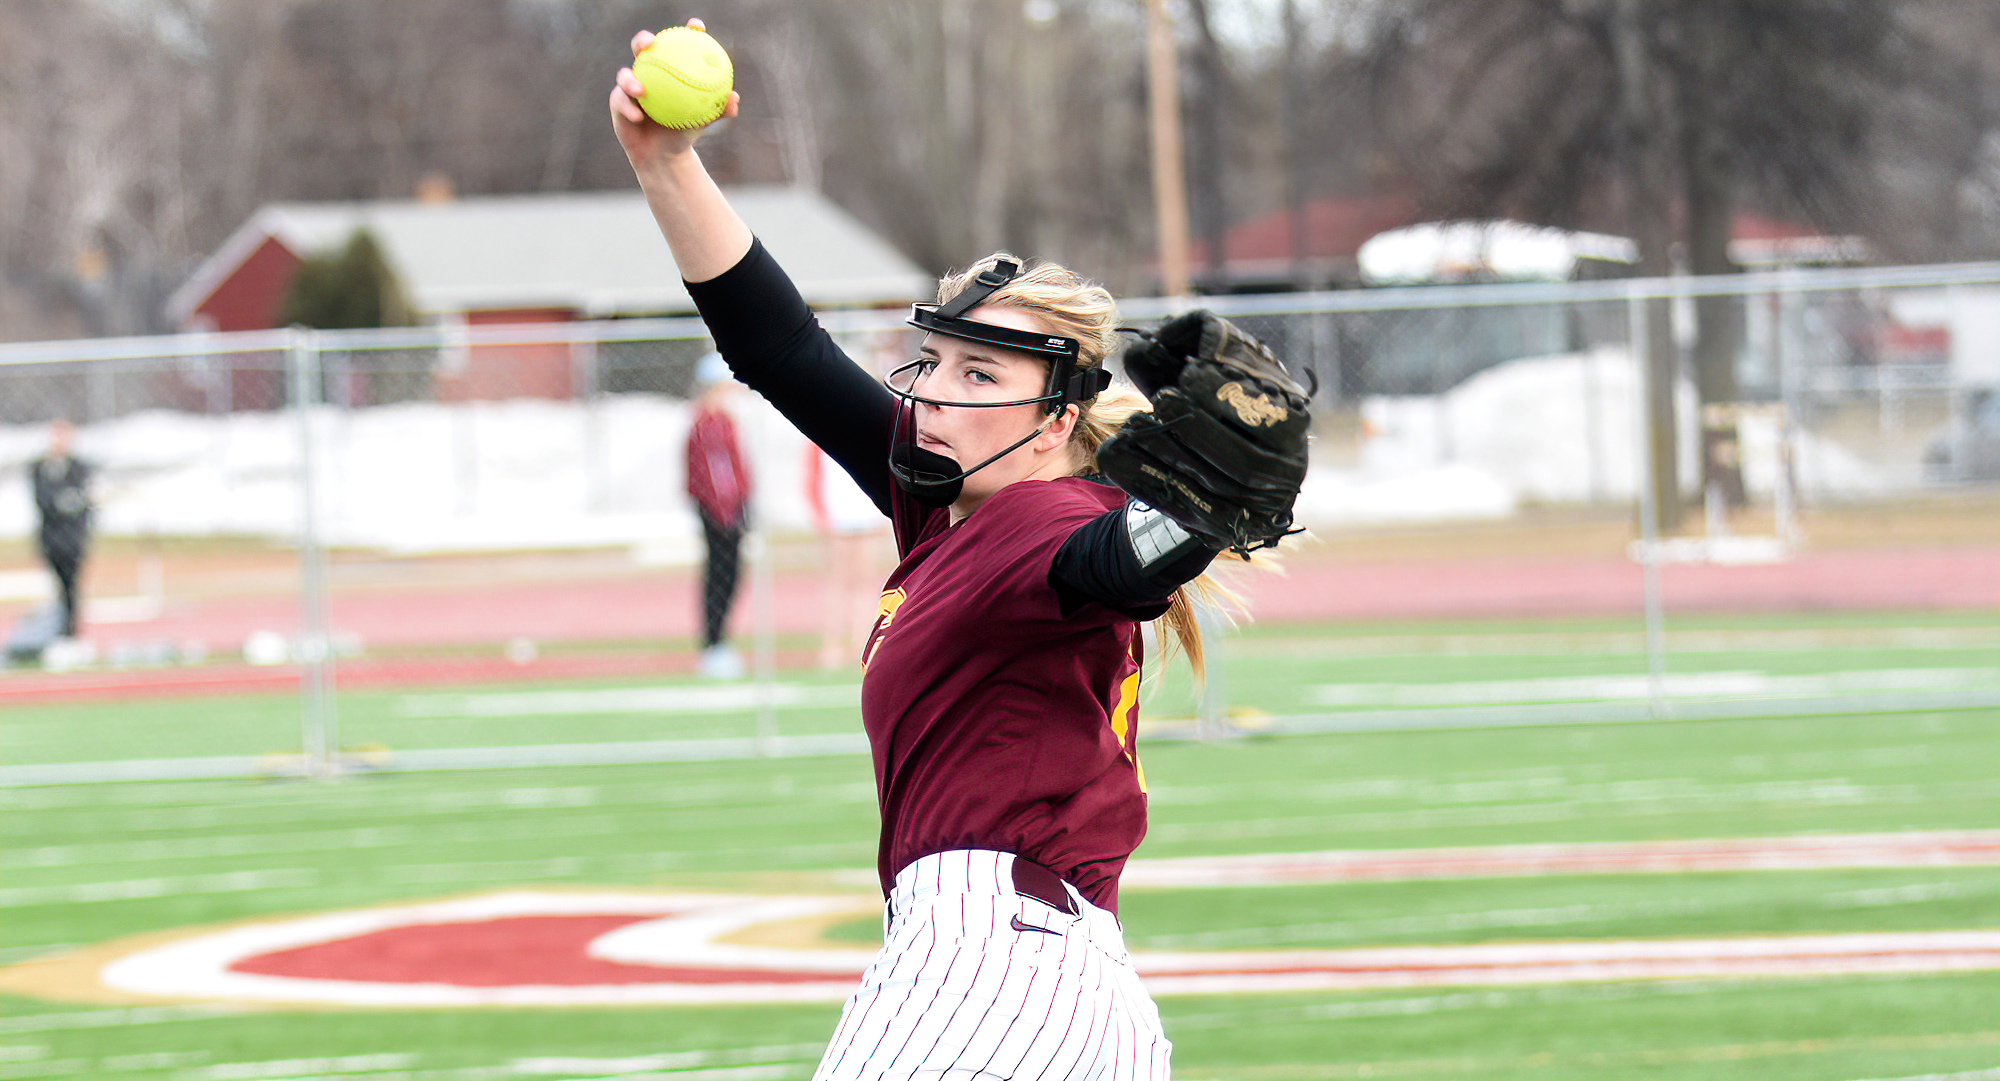 Junior Karissa Finnigan pitched a complete game in the Cobbers' win over Rivier. She allowed six hits, two runs and struck out five.